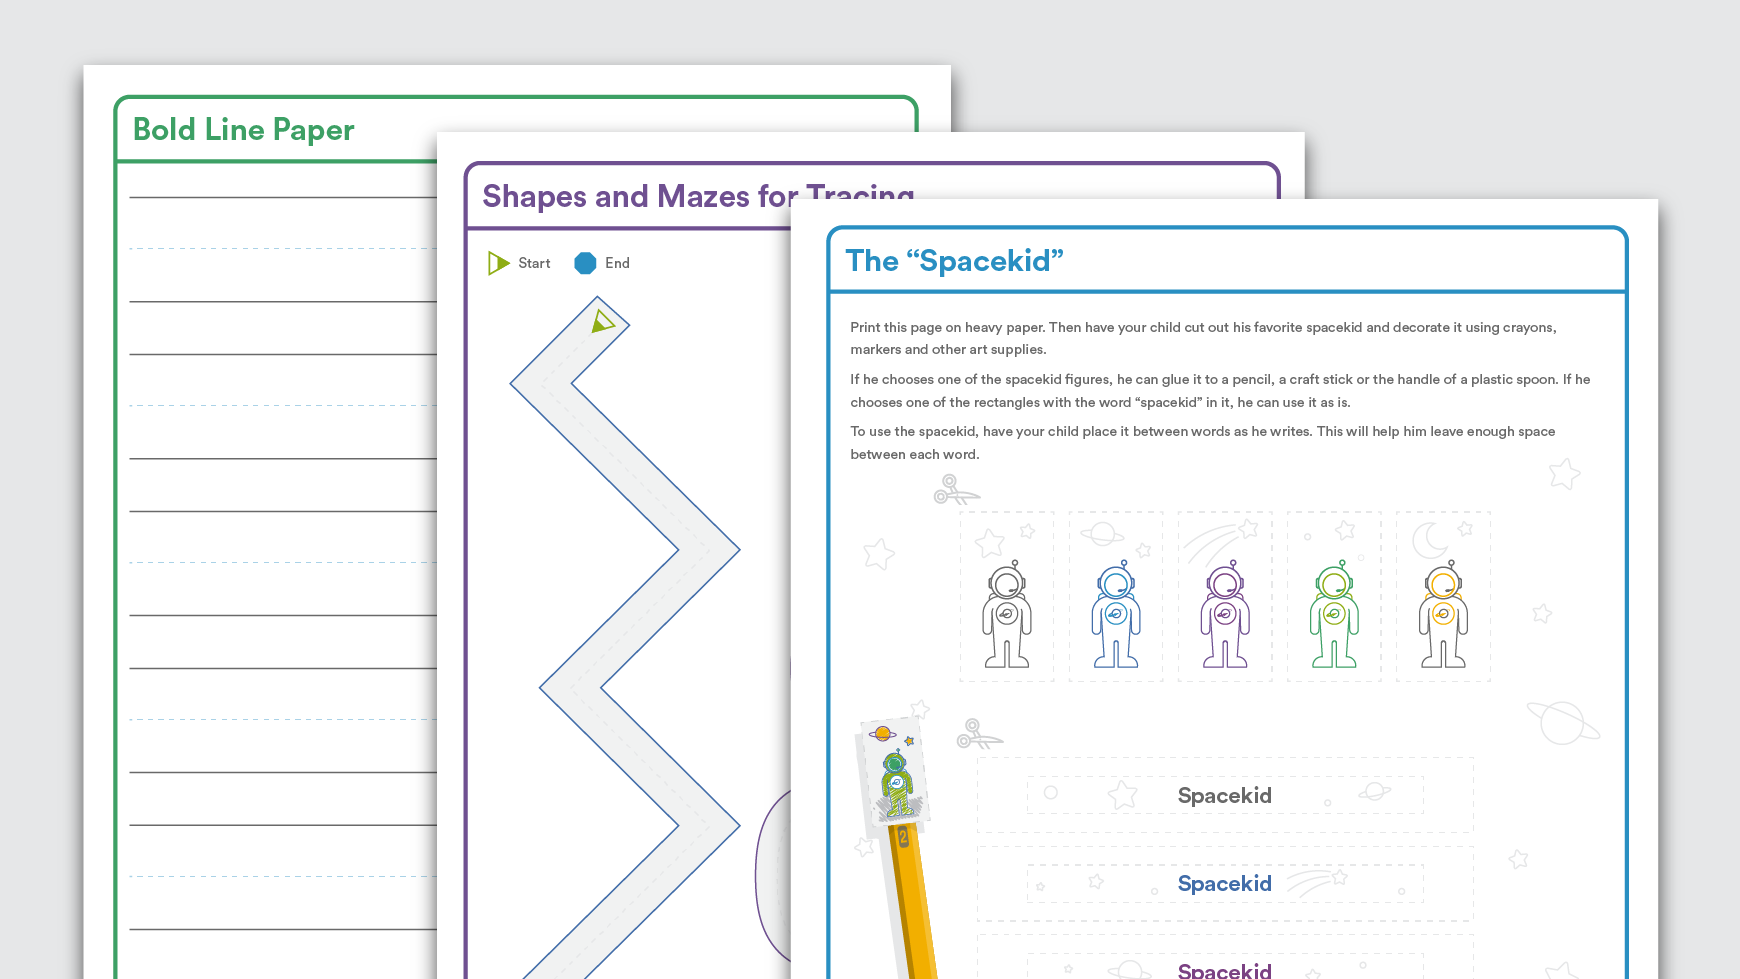 Download: Tools To Help With Handwriting | Handwriting